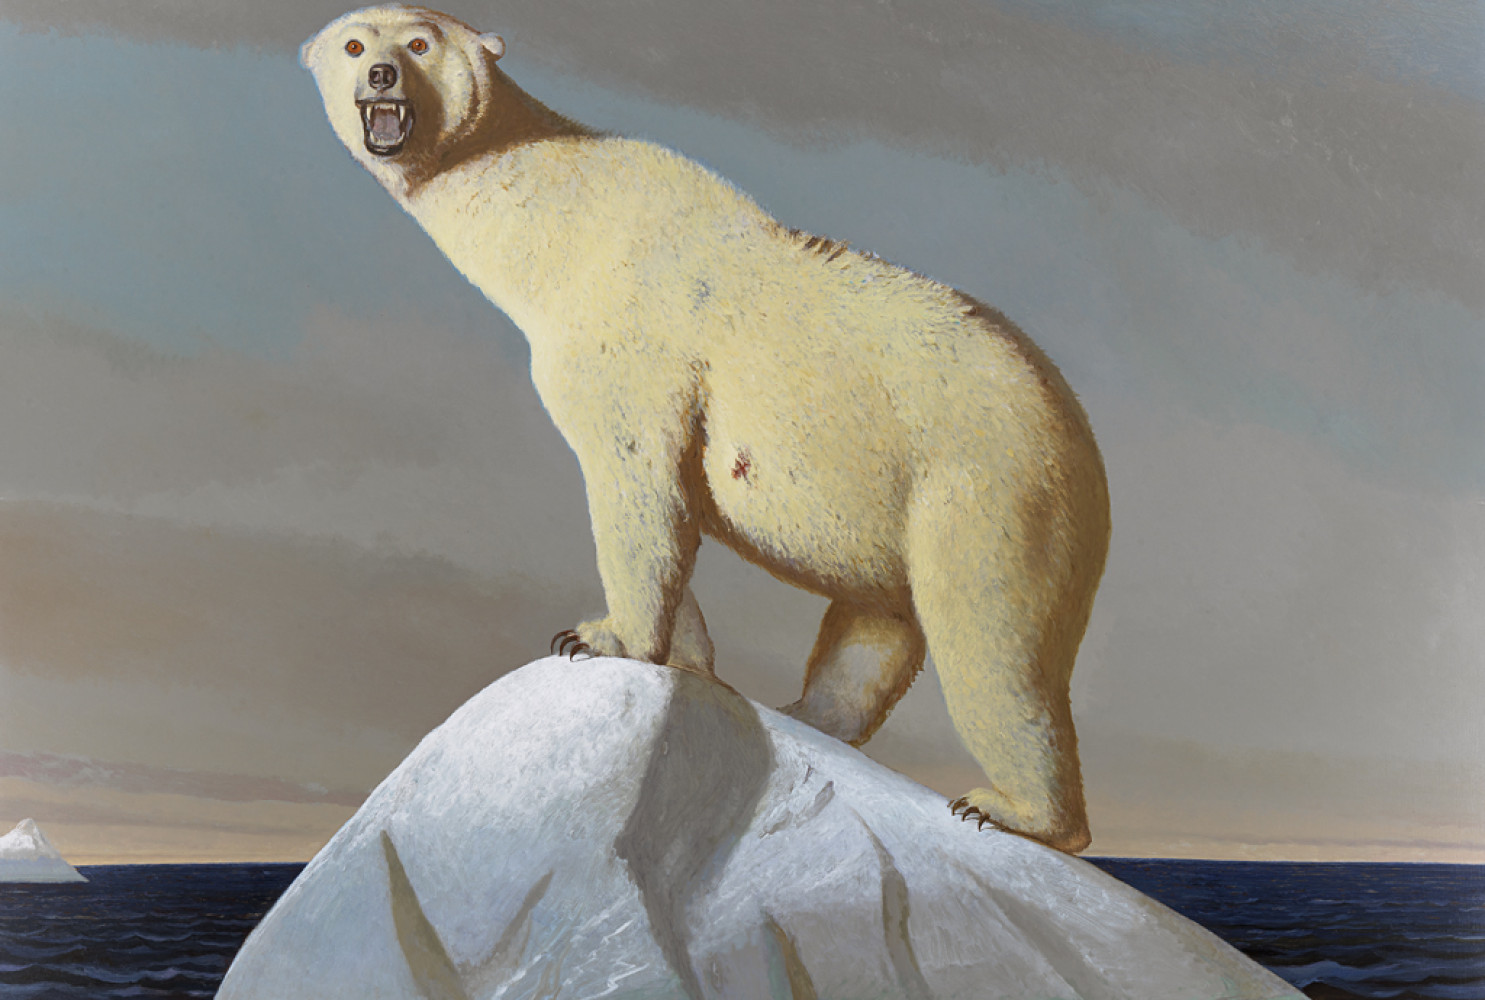 Dominion, 2016, by Bo Bartlett (American, b. 1955). Oil on linen, 82 x 100 inches.  Image courtesy of the artist and Miles McEnery Gallery, New York, NY. Loan courtesy Asheville Art Museum, Asheville, NC, gift of Alex Washburn, 2021.71.01